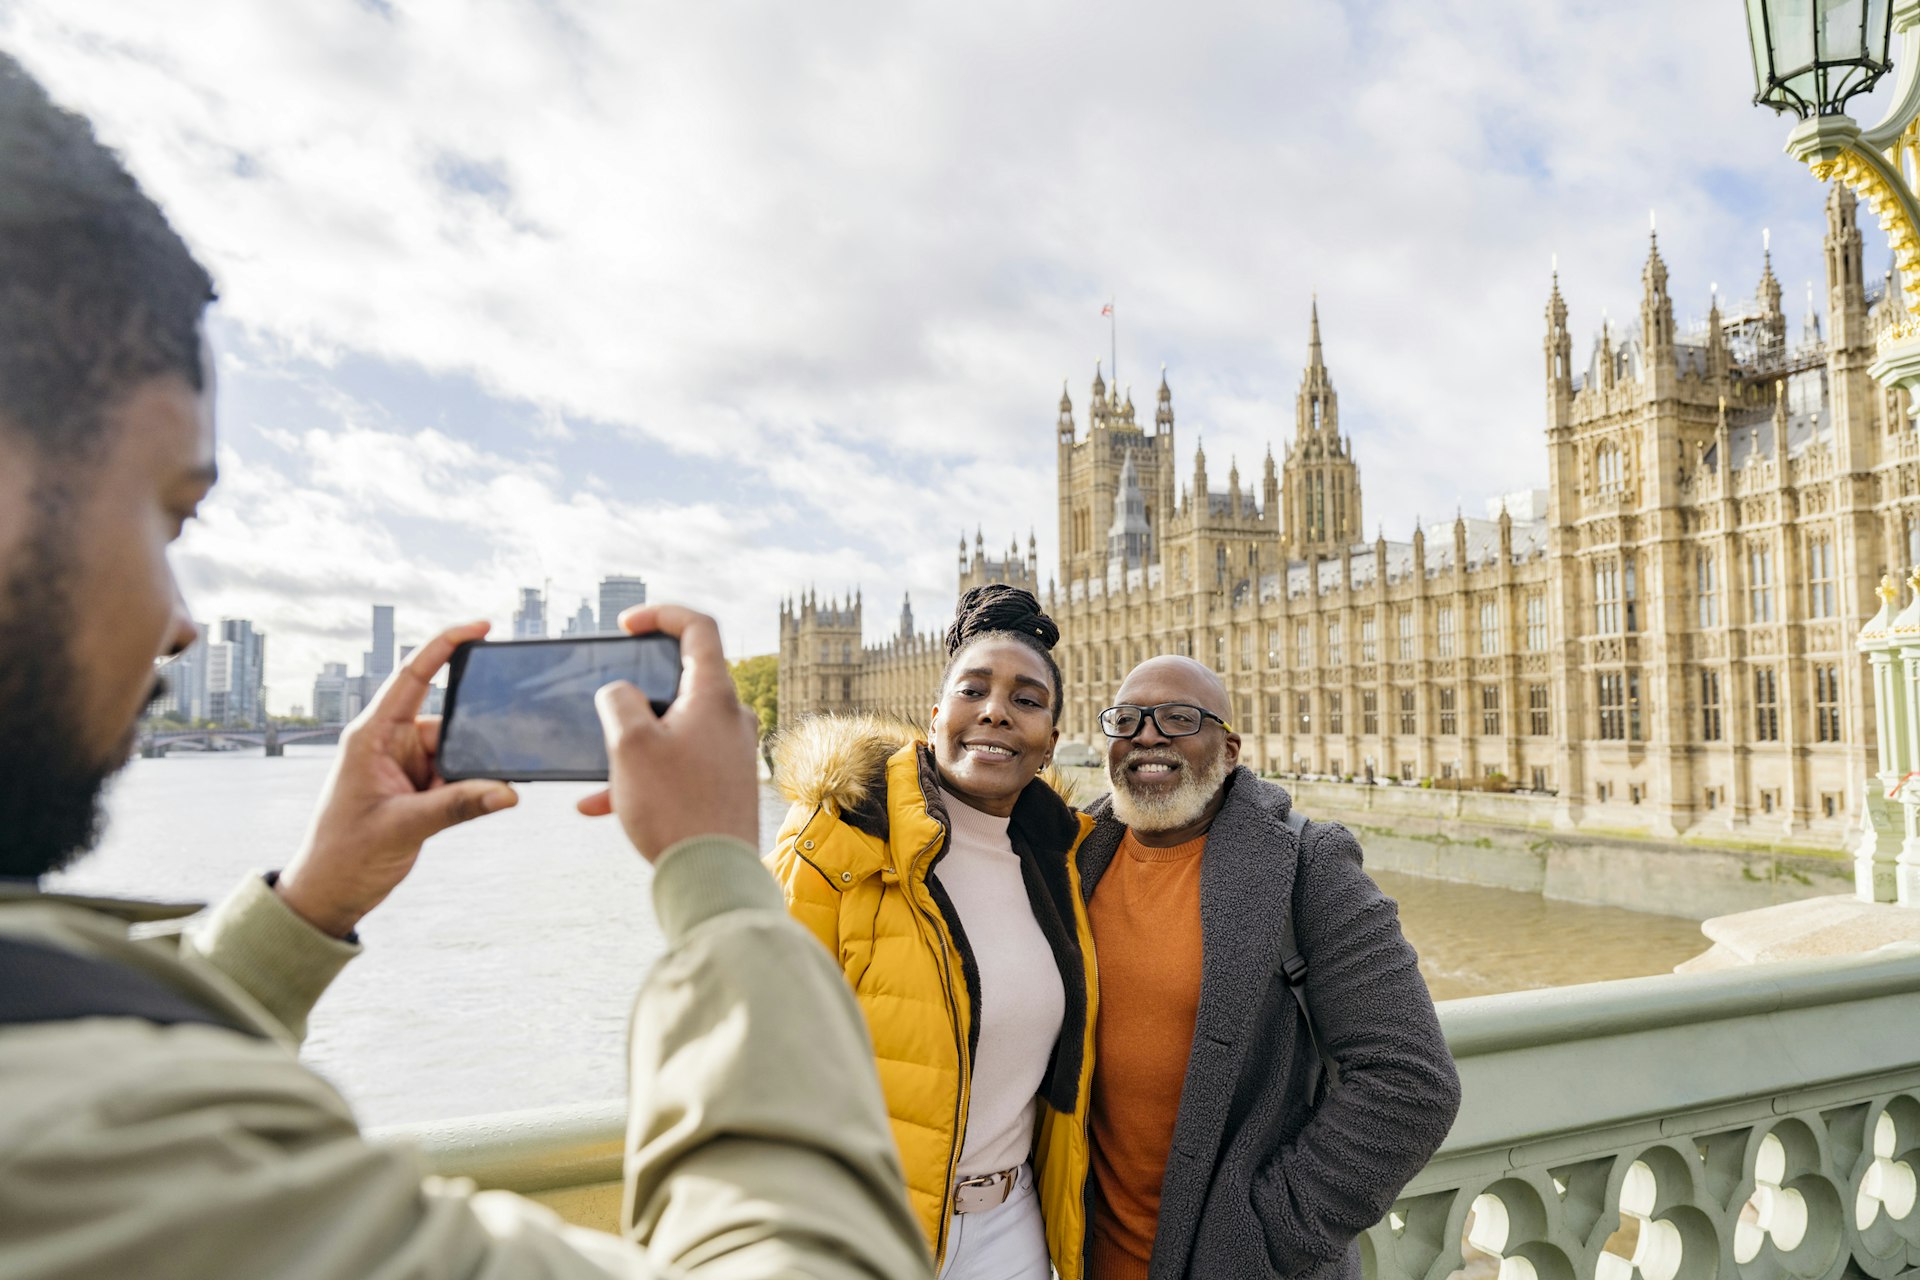 Young Black man holding smart phone and photographing mature couple in warm clothing with River Thames and Houses of Parliament in background.